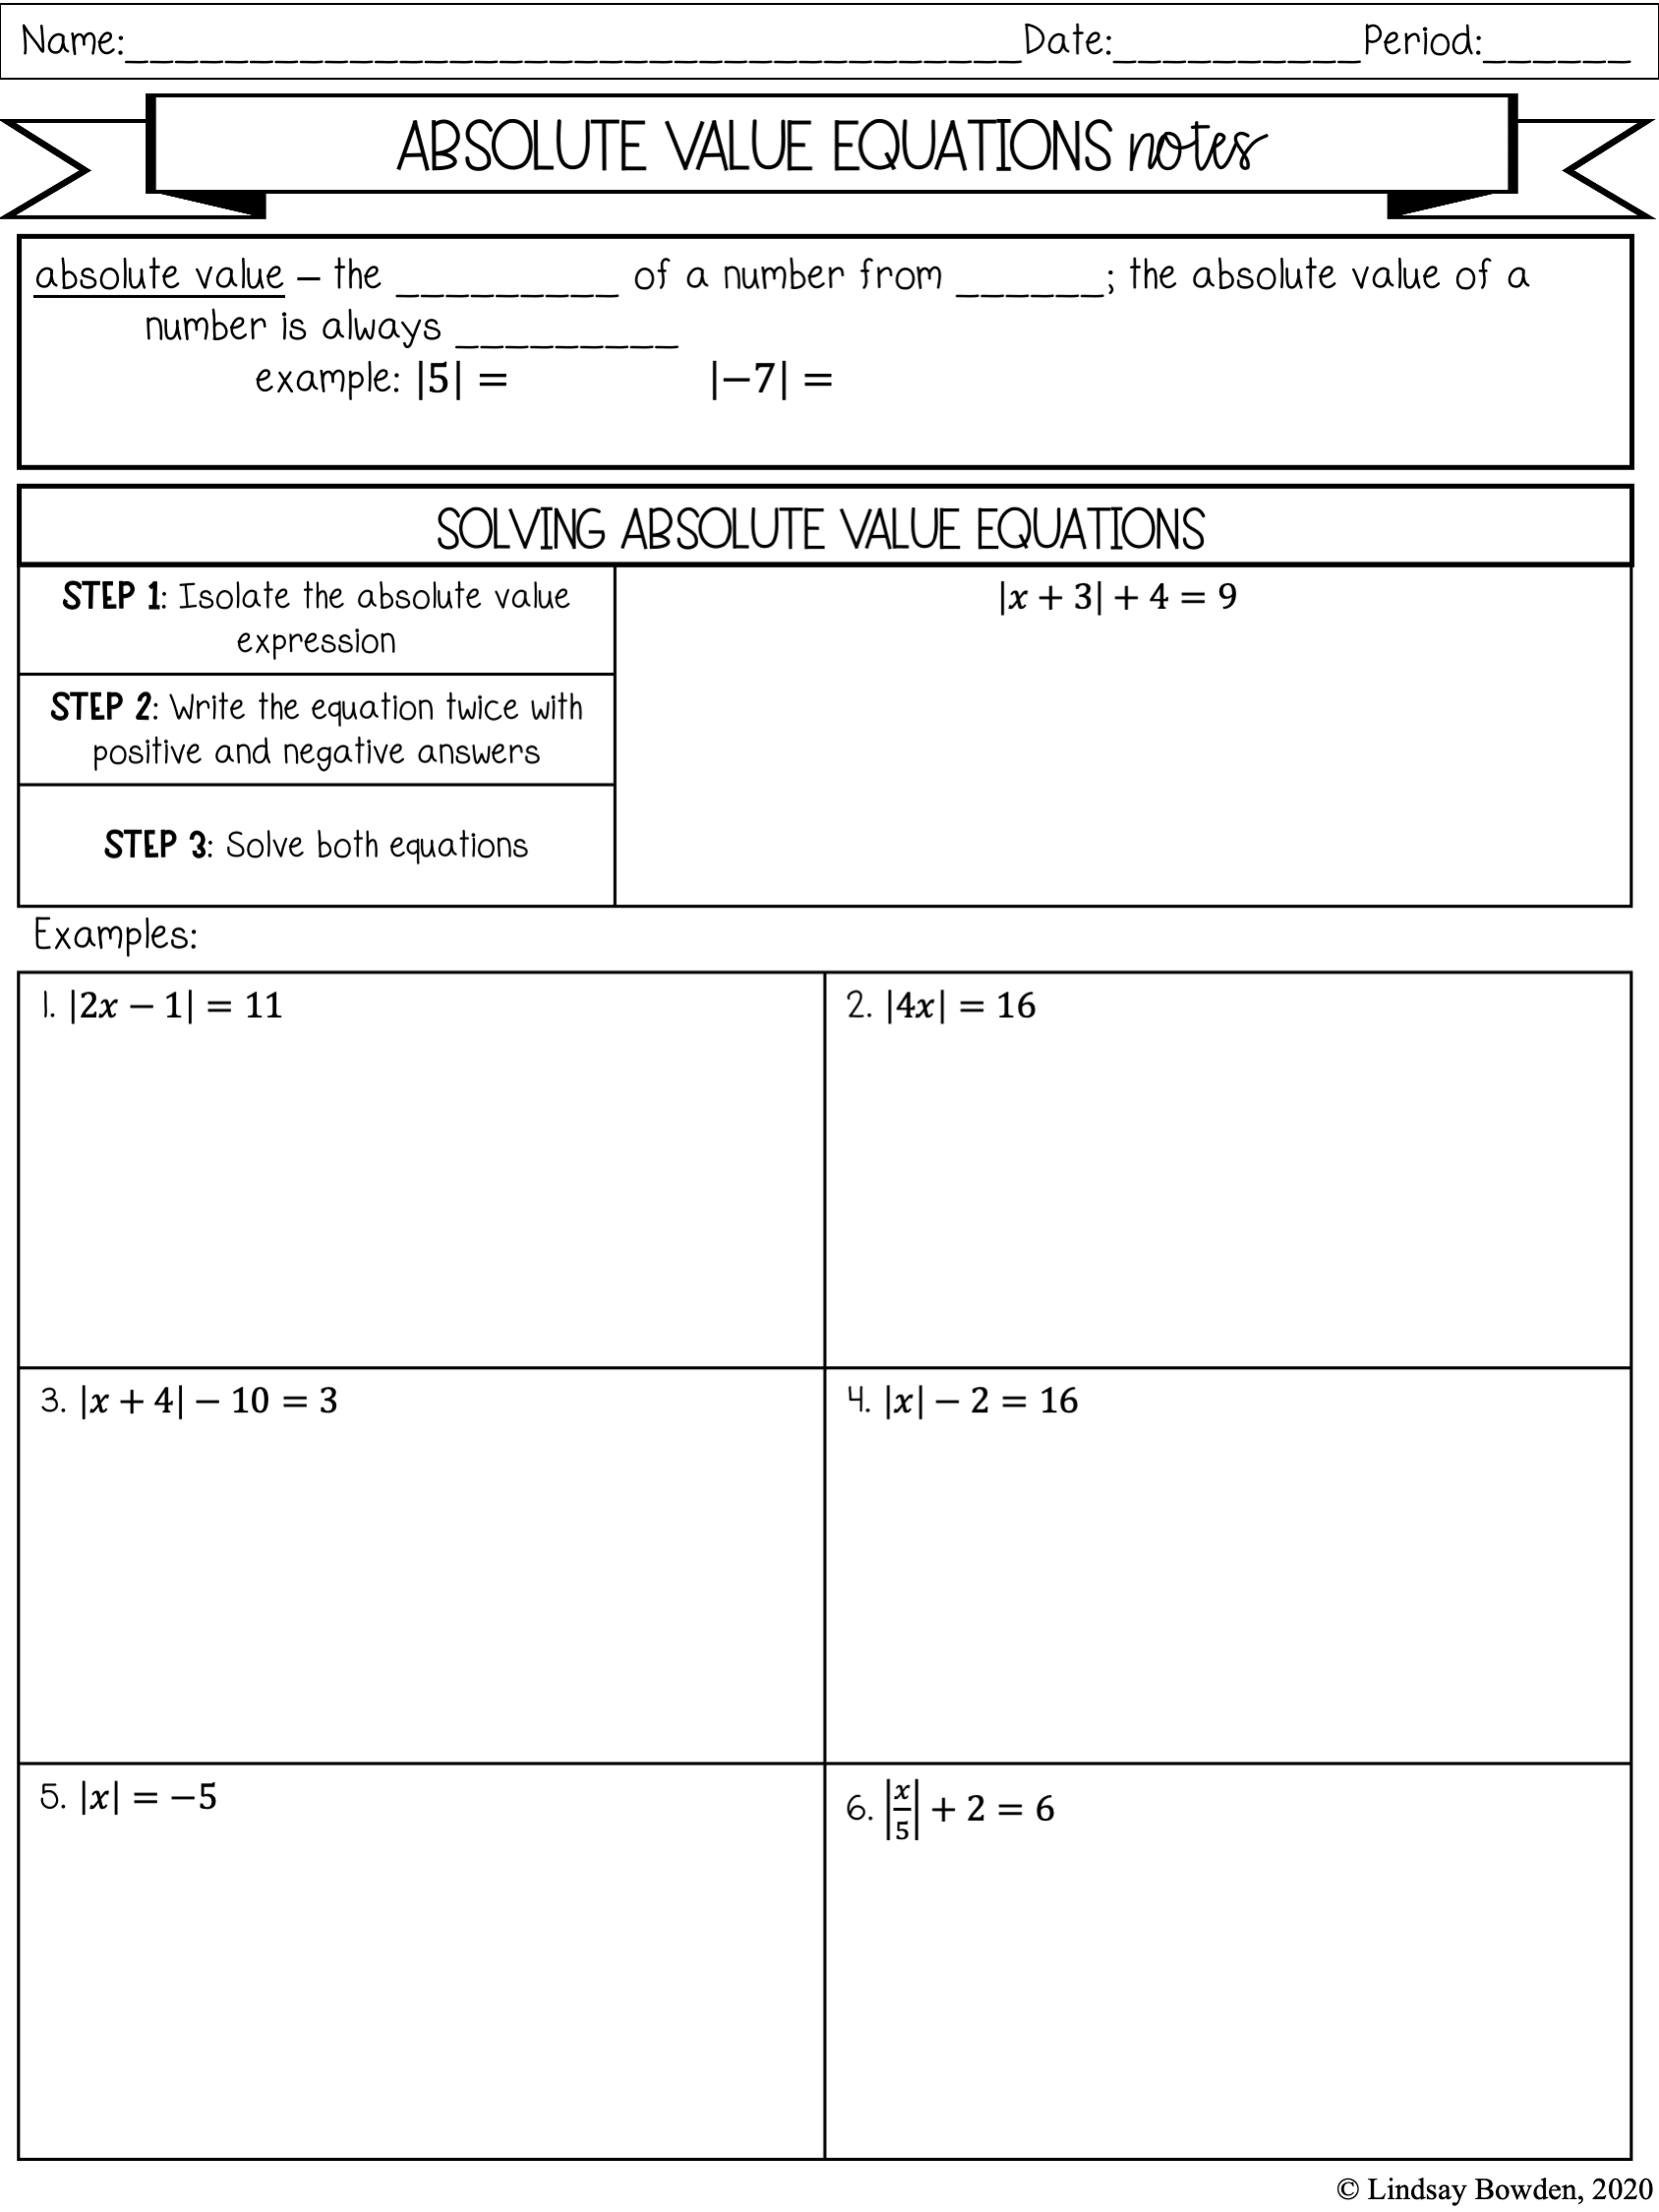 Absolute Value Notes and Worksheets - Lindsay Bowden Within Absolute Value Inequalities Worksheet